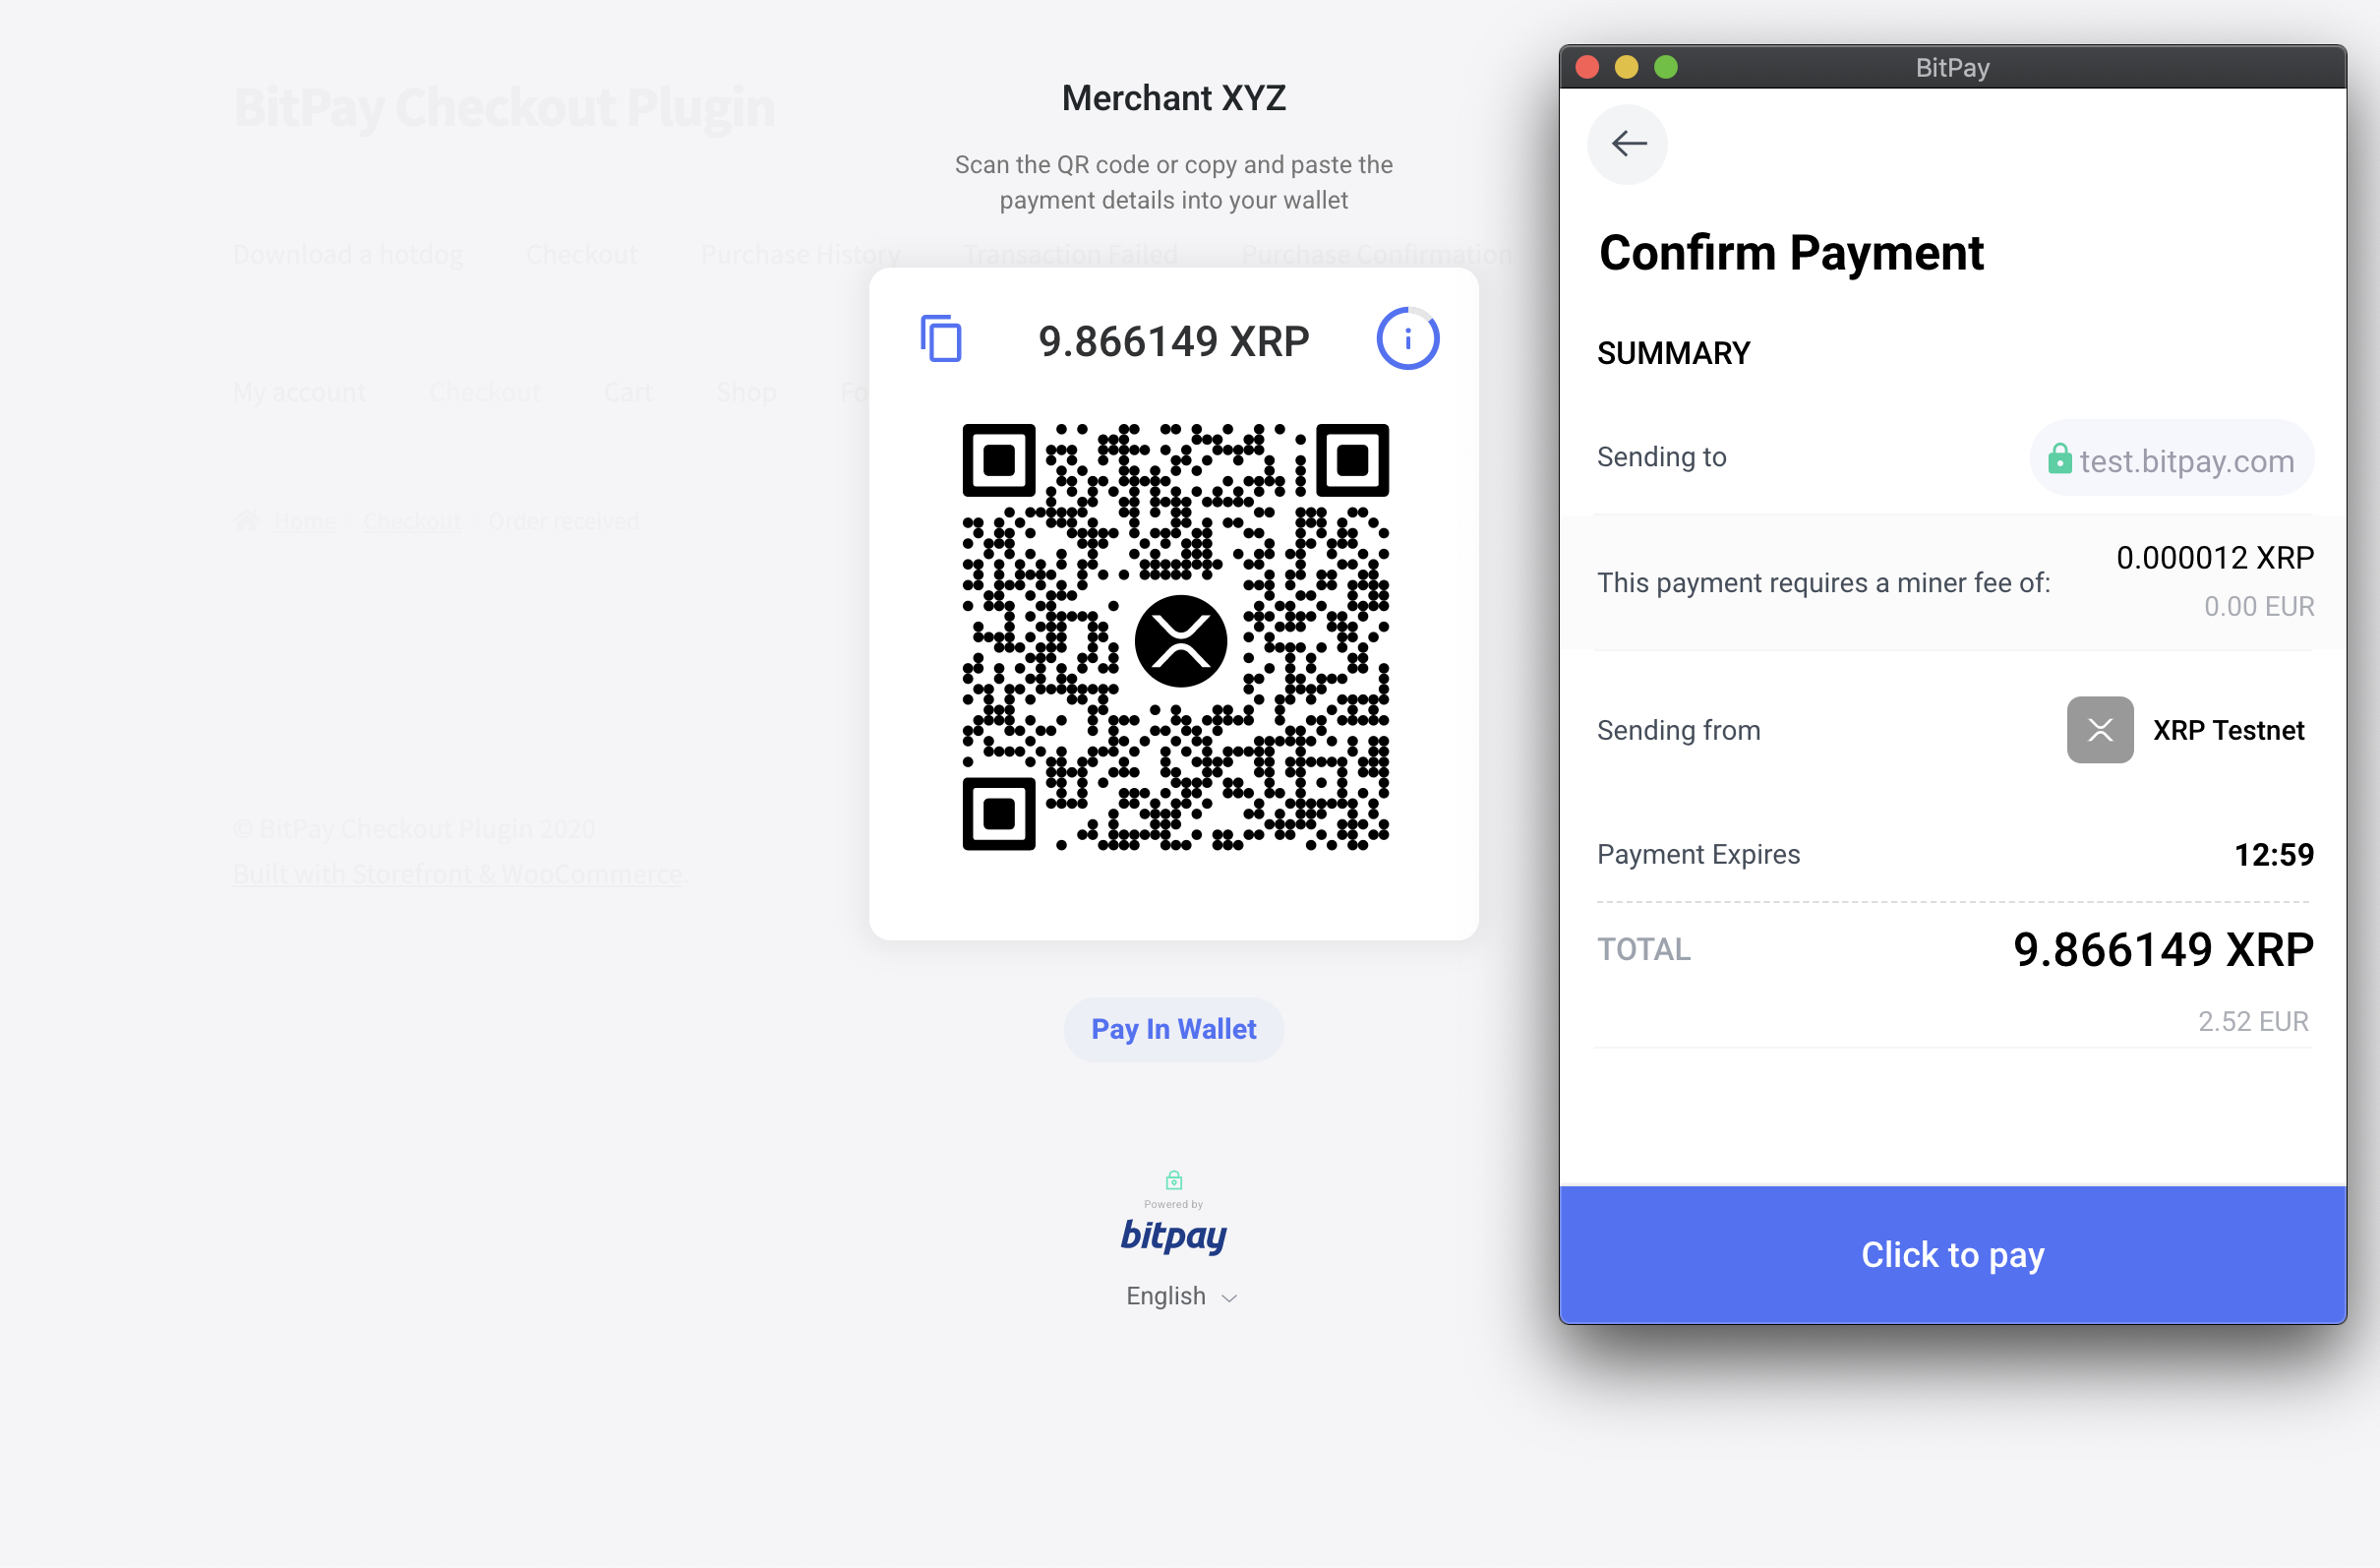 BitPay merchant dashboard - the invoice previously paid is recorded under the "Payments" section